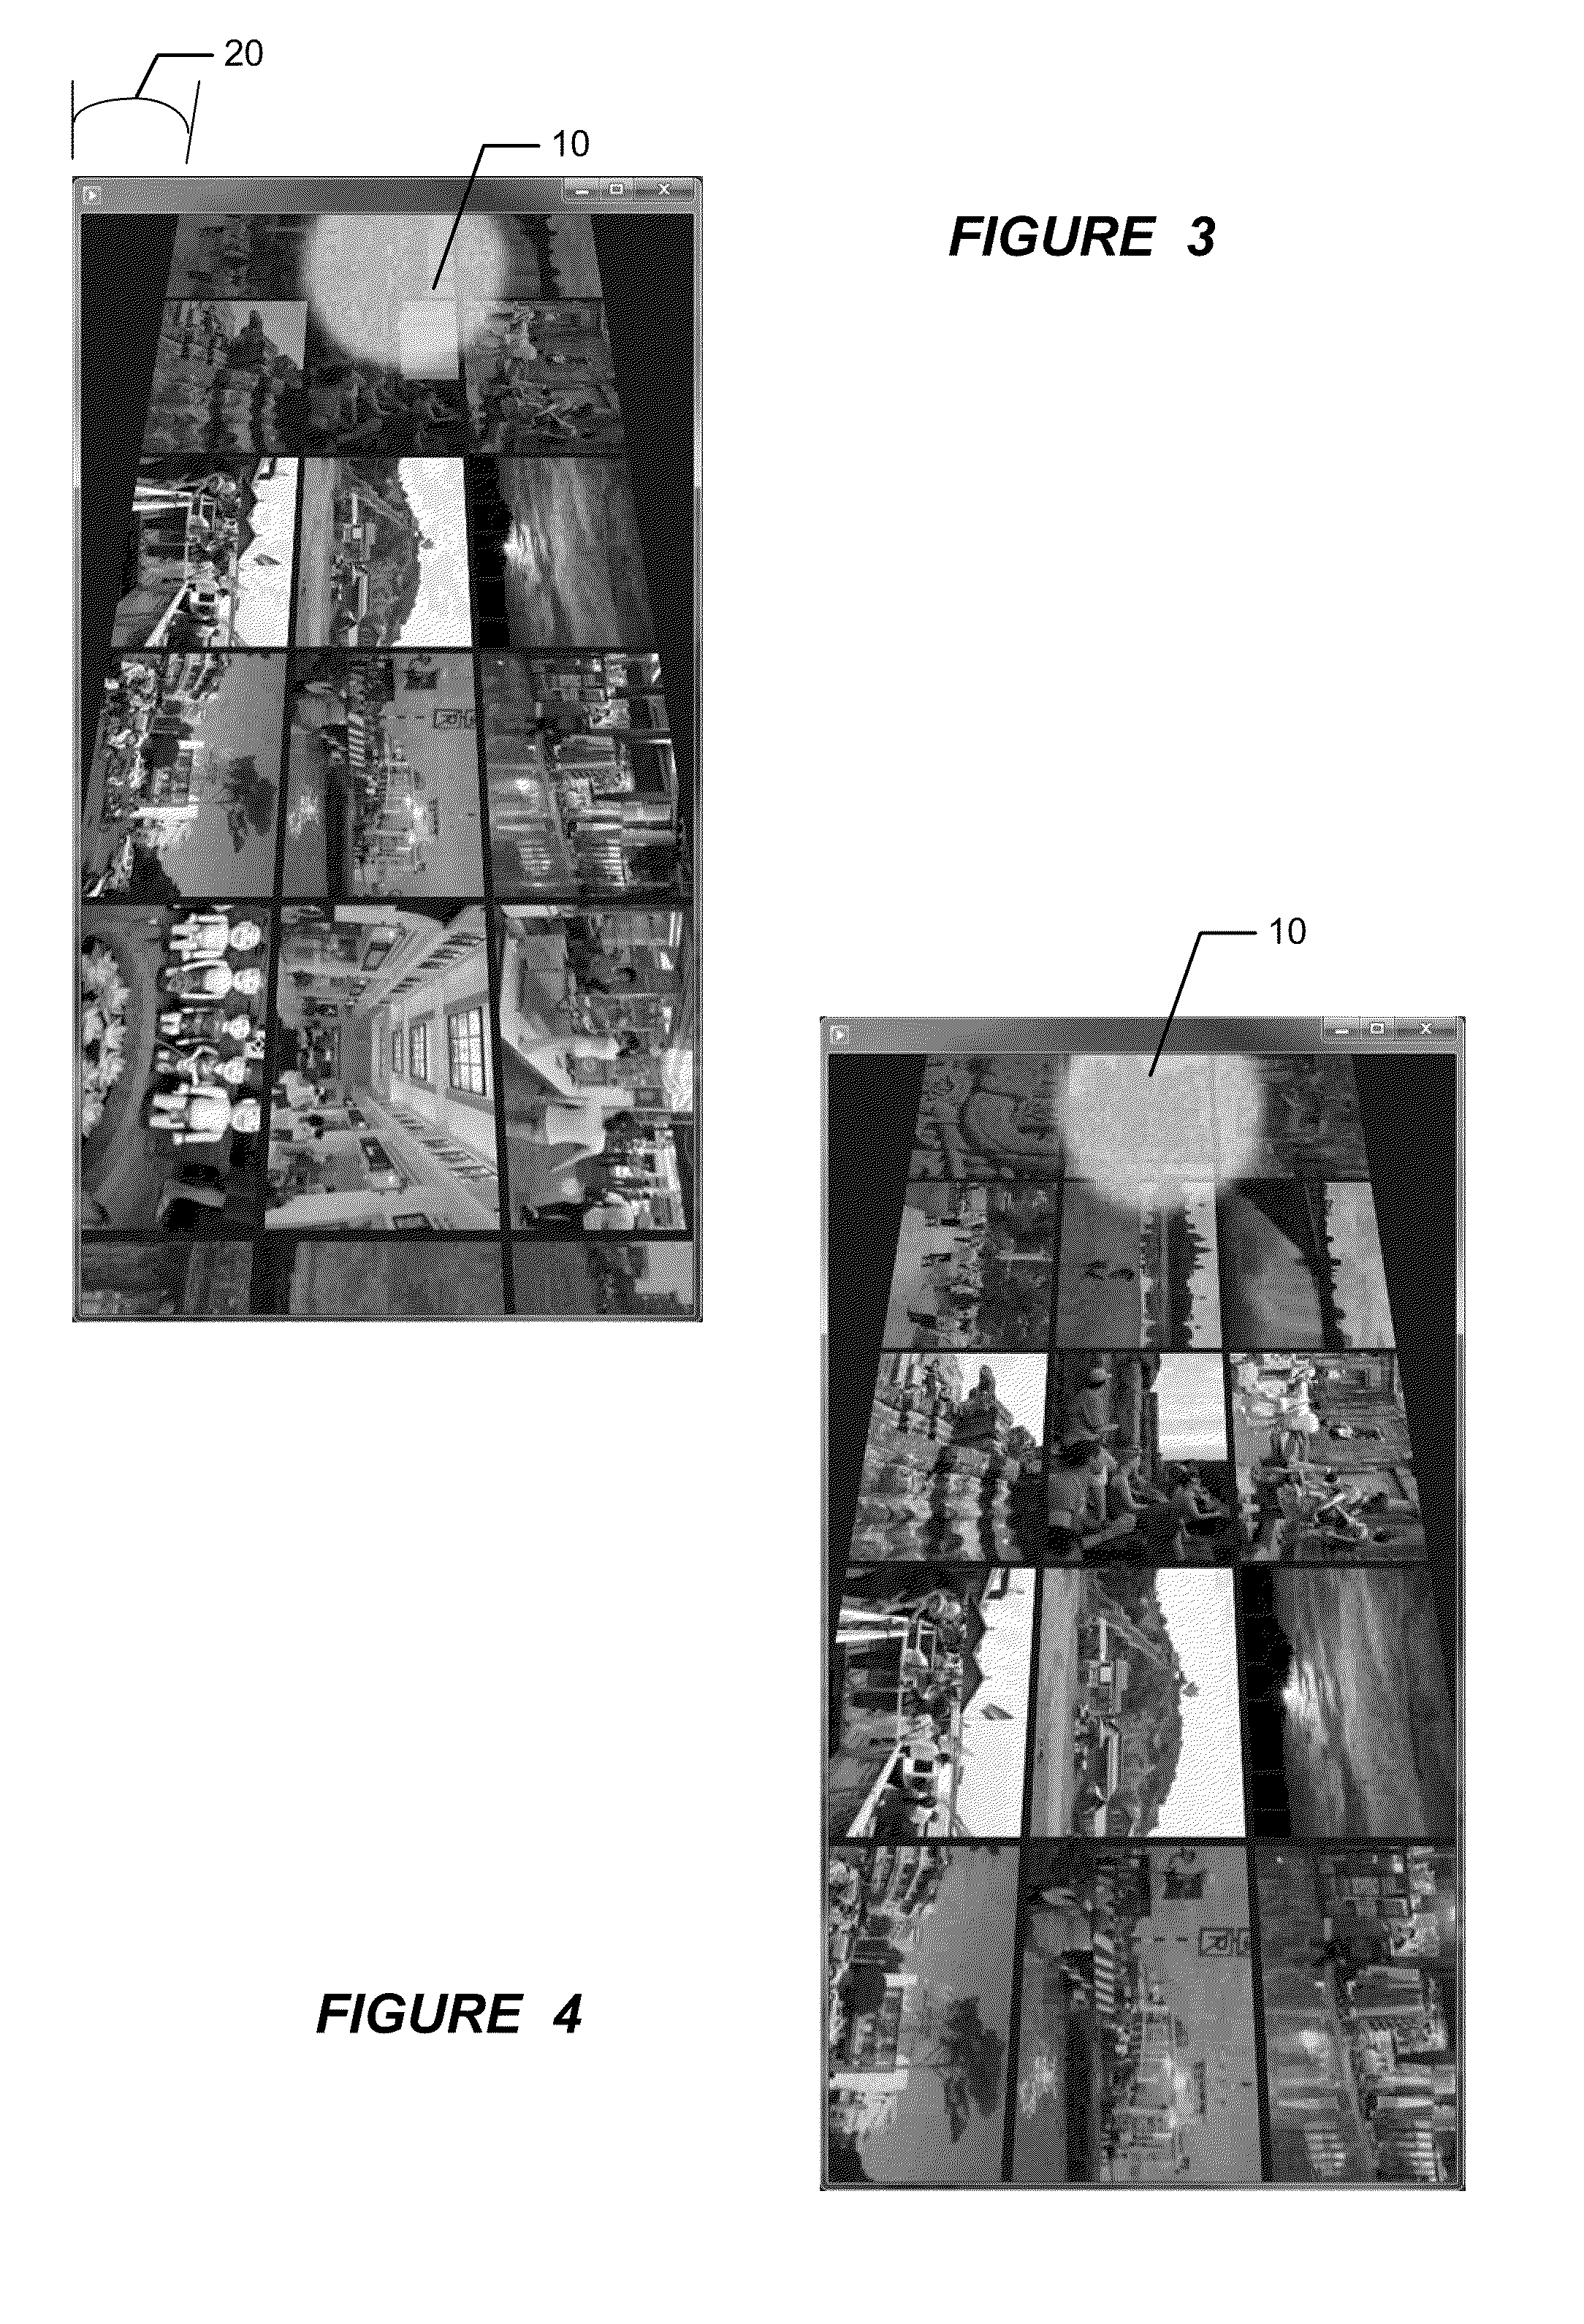 Regulation of navigation speed among displayed items and tilt angle thereof responsive to user applied pressure